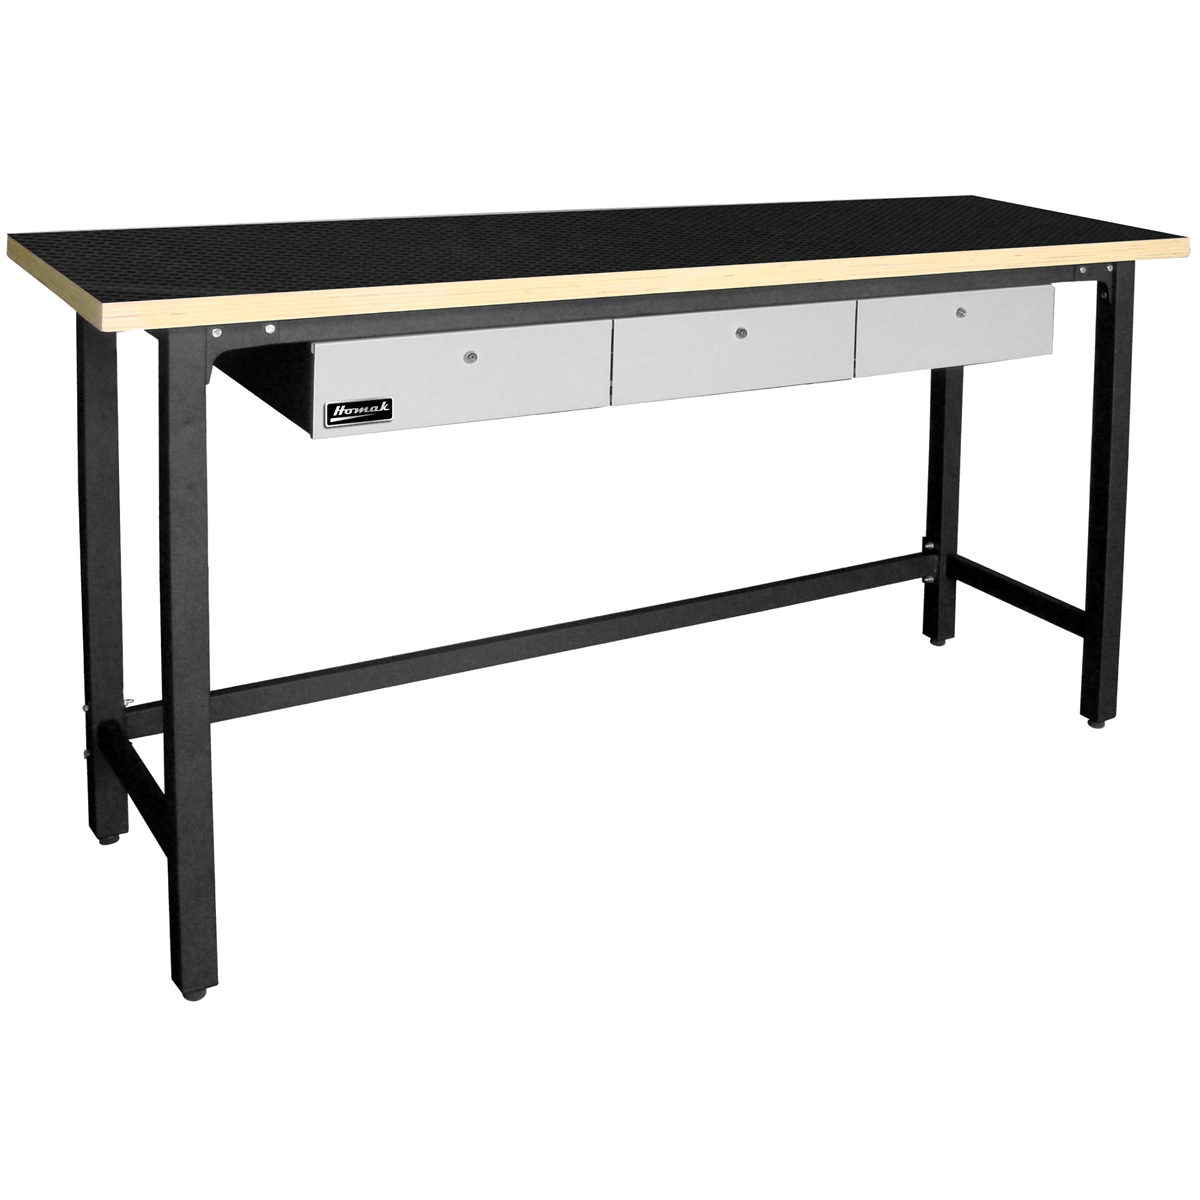 79" Steel Workbench With 3 Drawers and Wood Top